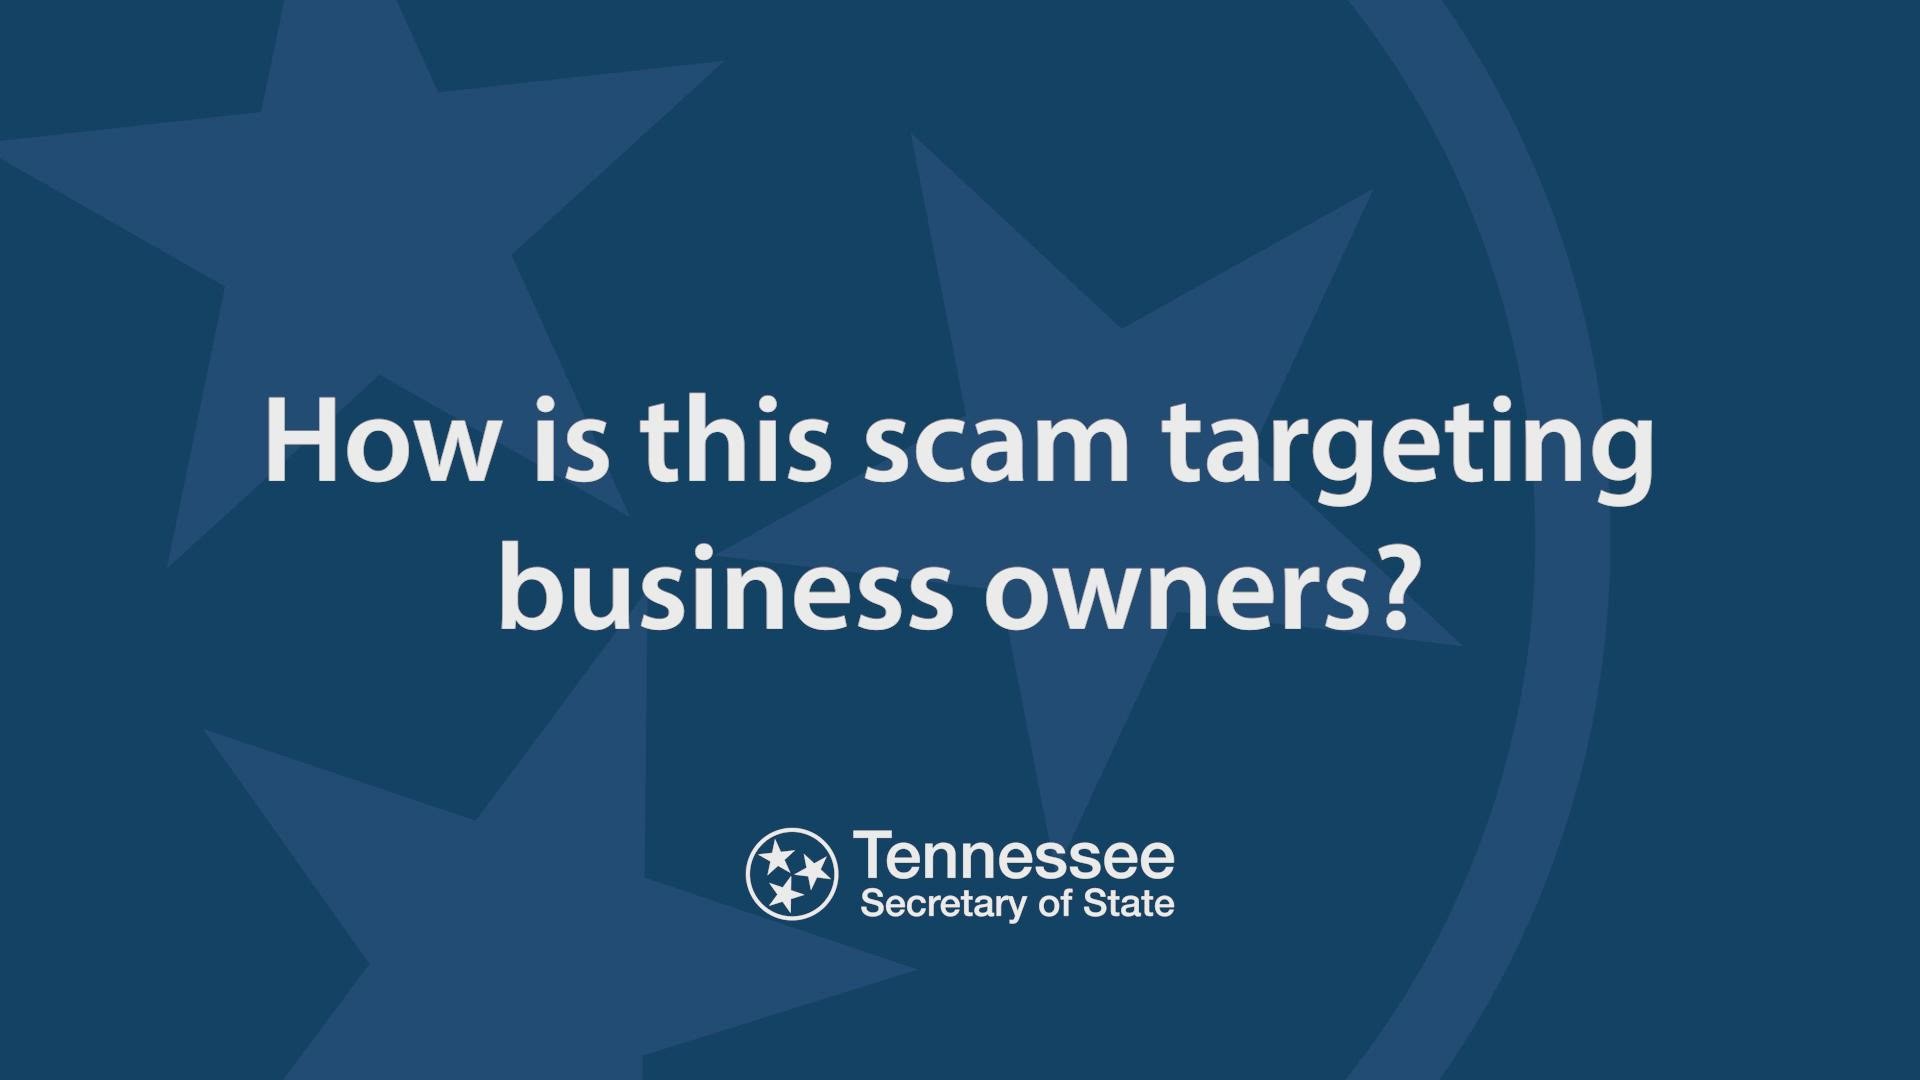 If you get an official-looking notice that claims you need to pay to get a ‘Tennessee Certificate of Existence’ – don’t believe it.